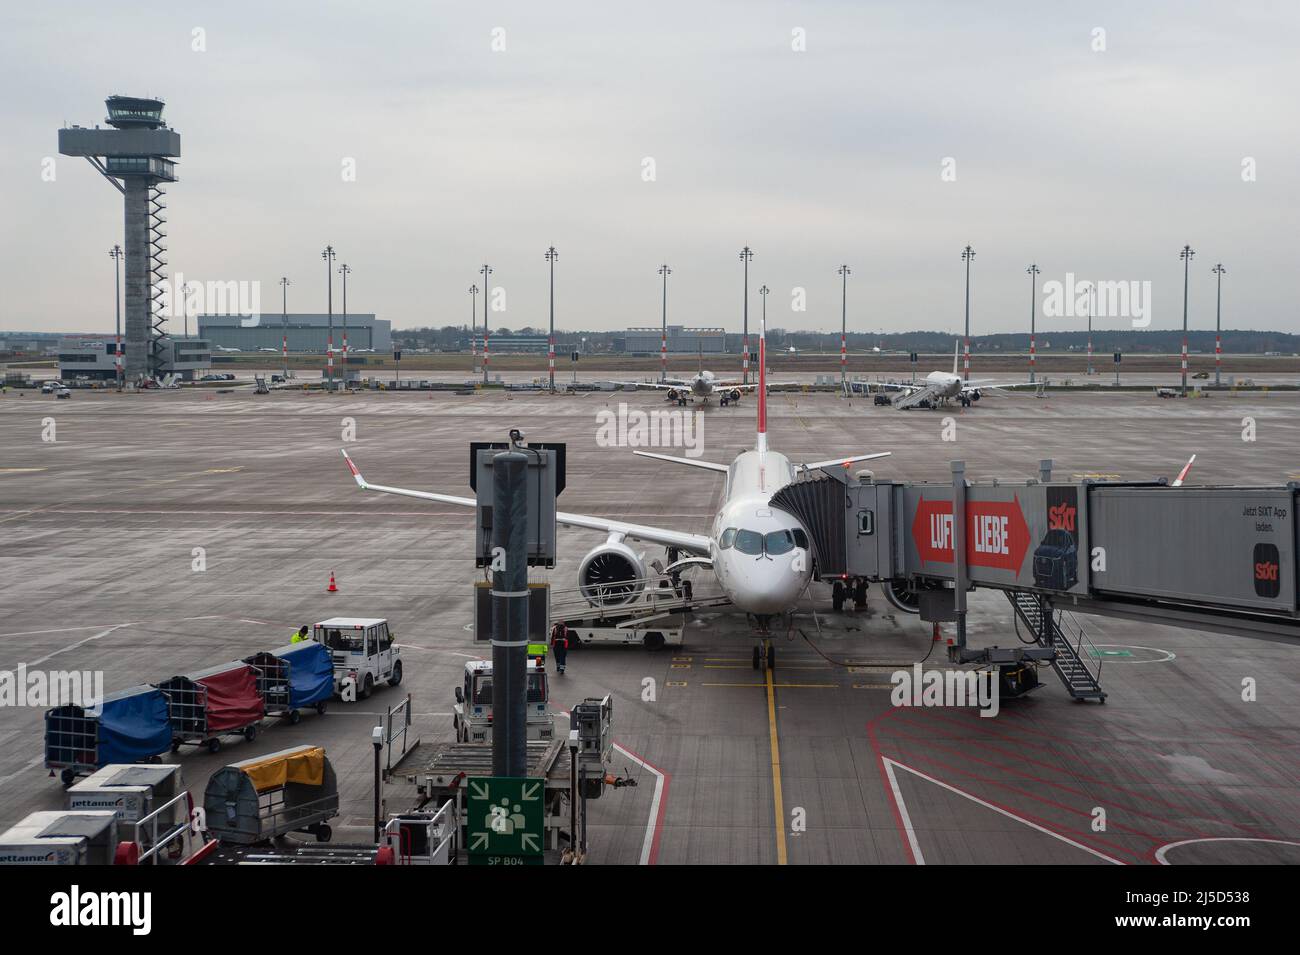 'Dec. 14, 2021, Berlin, Germany, Europe - An Airbus A220-300 passenger aircraft of Swiss International Air Lines parks at a gate at Berlin Brandenburg ''Willy Brandt'' Airport. Swiss is a member of the Star Alliance aviation alliance, an international network of airlines. [automated translation]' Stock Photo